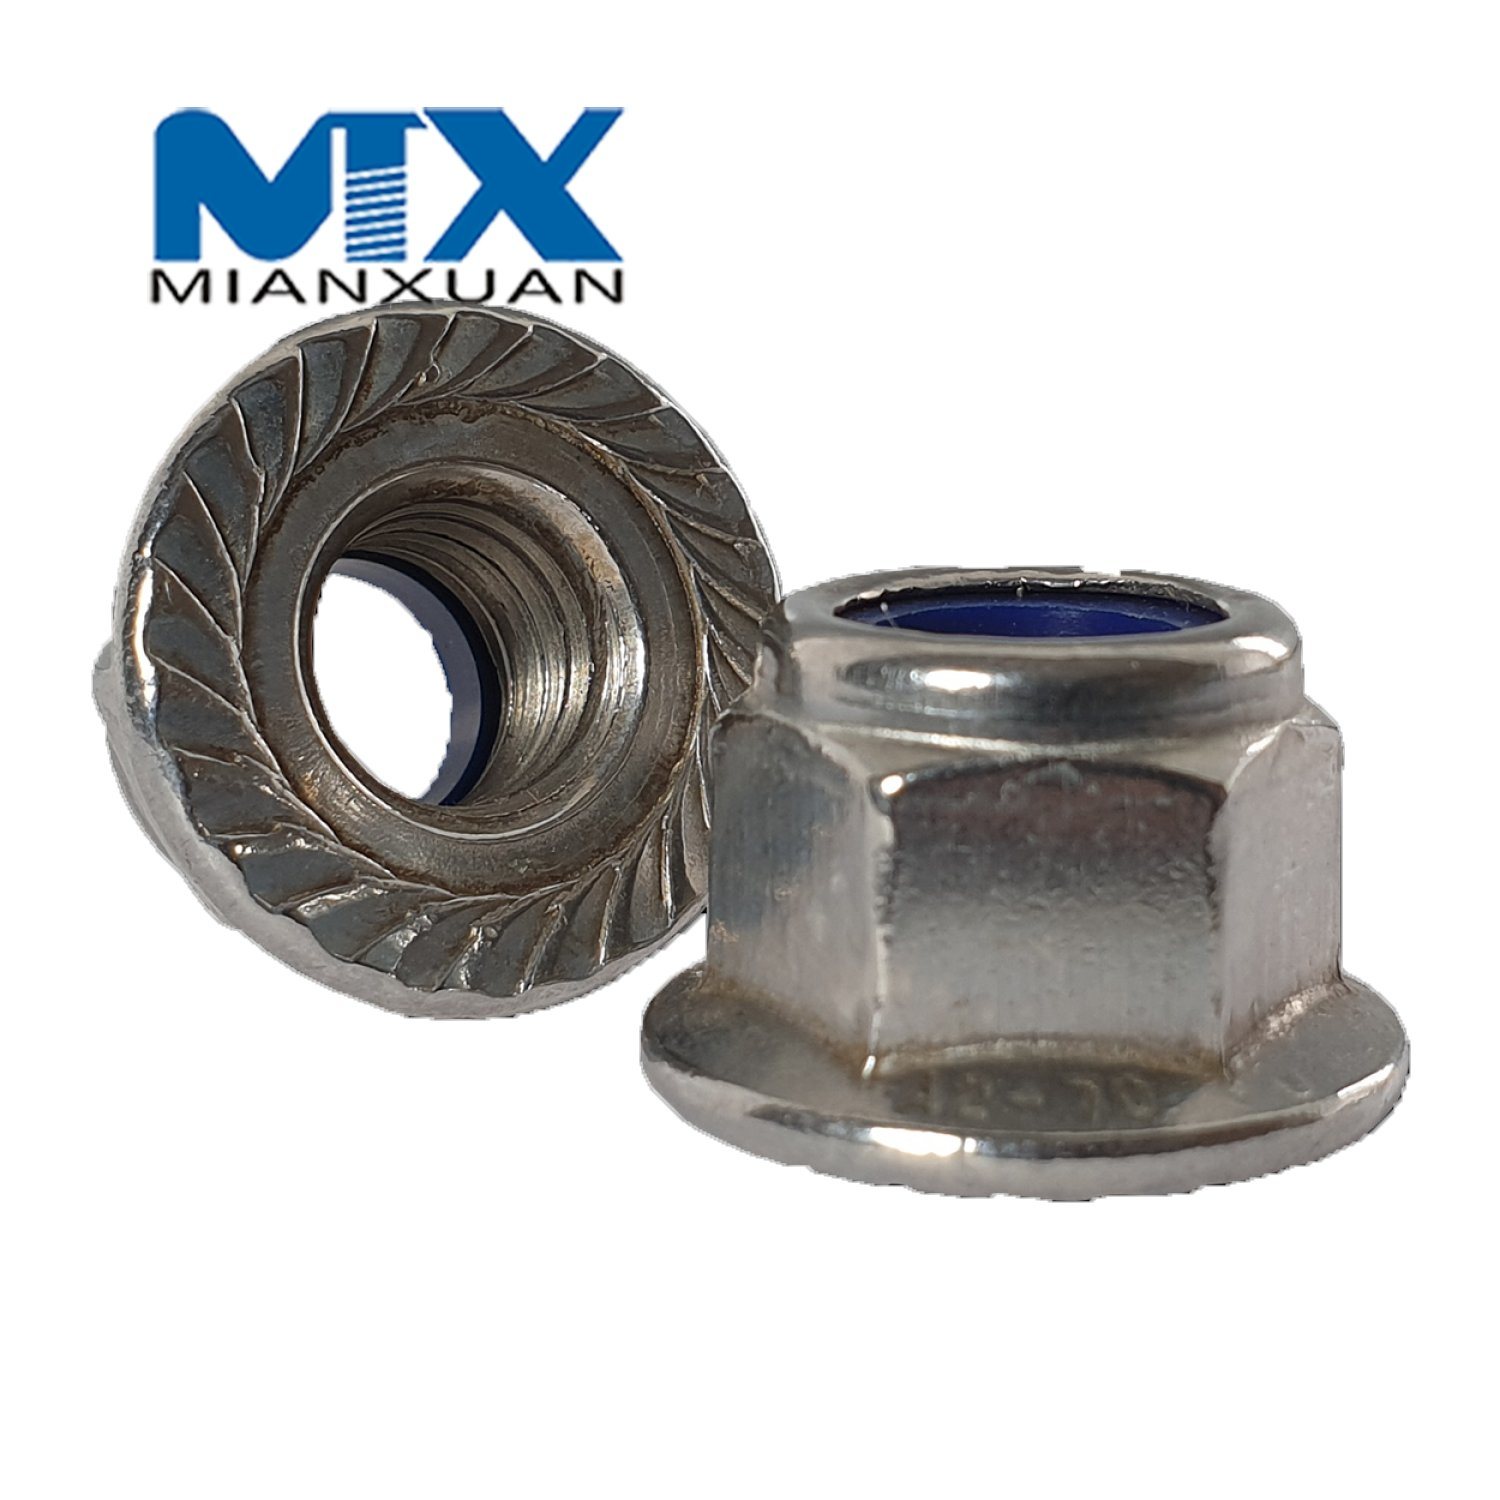 DIN6923 Hex Lock Nut Flange with Knurled No-Knurled